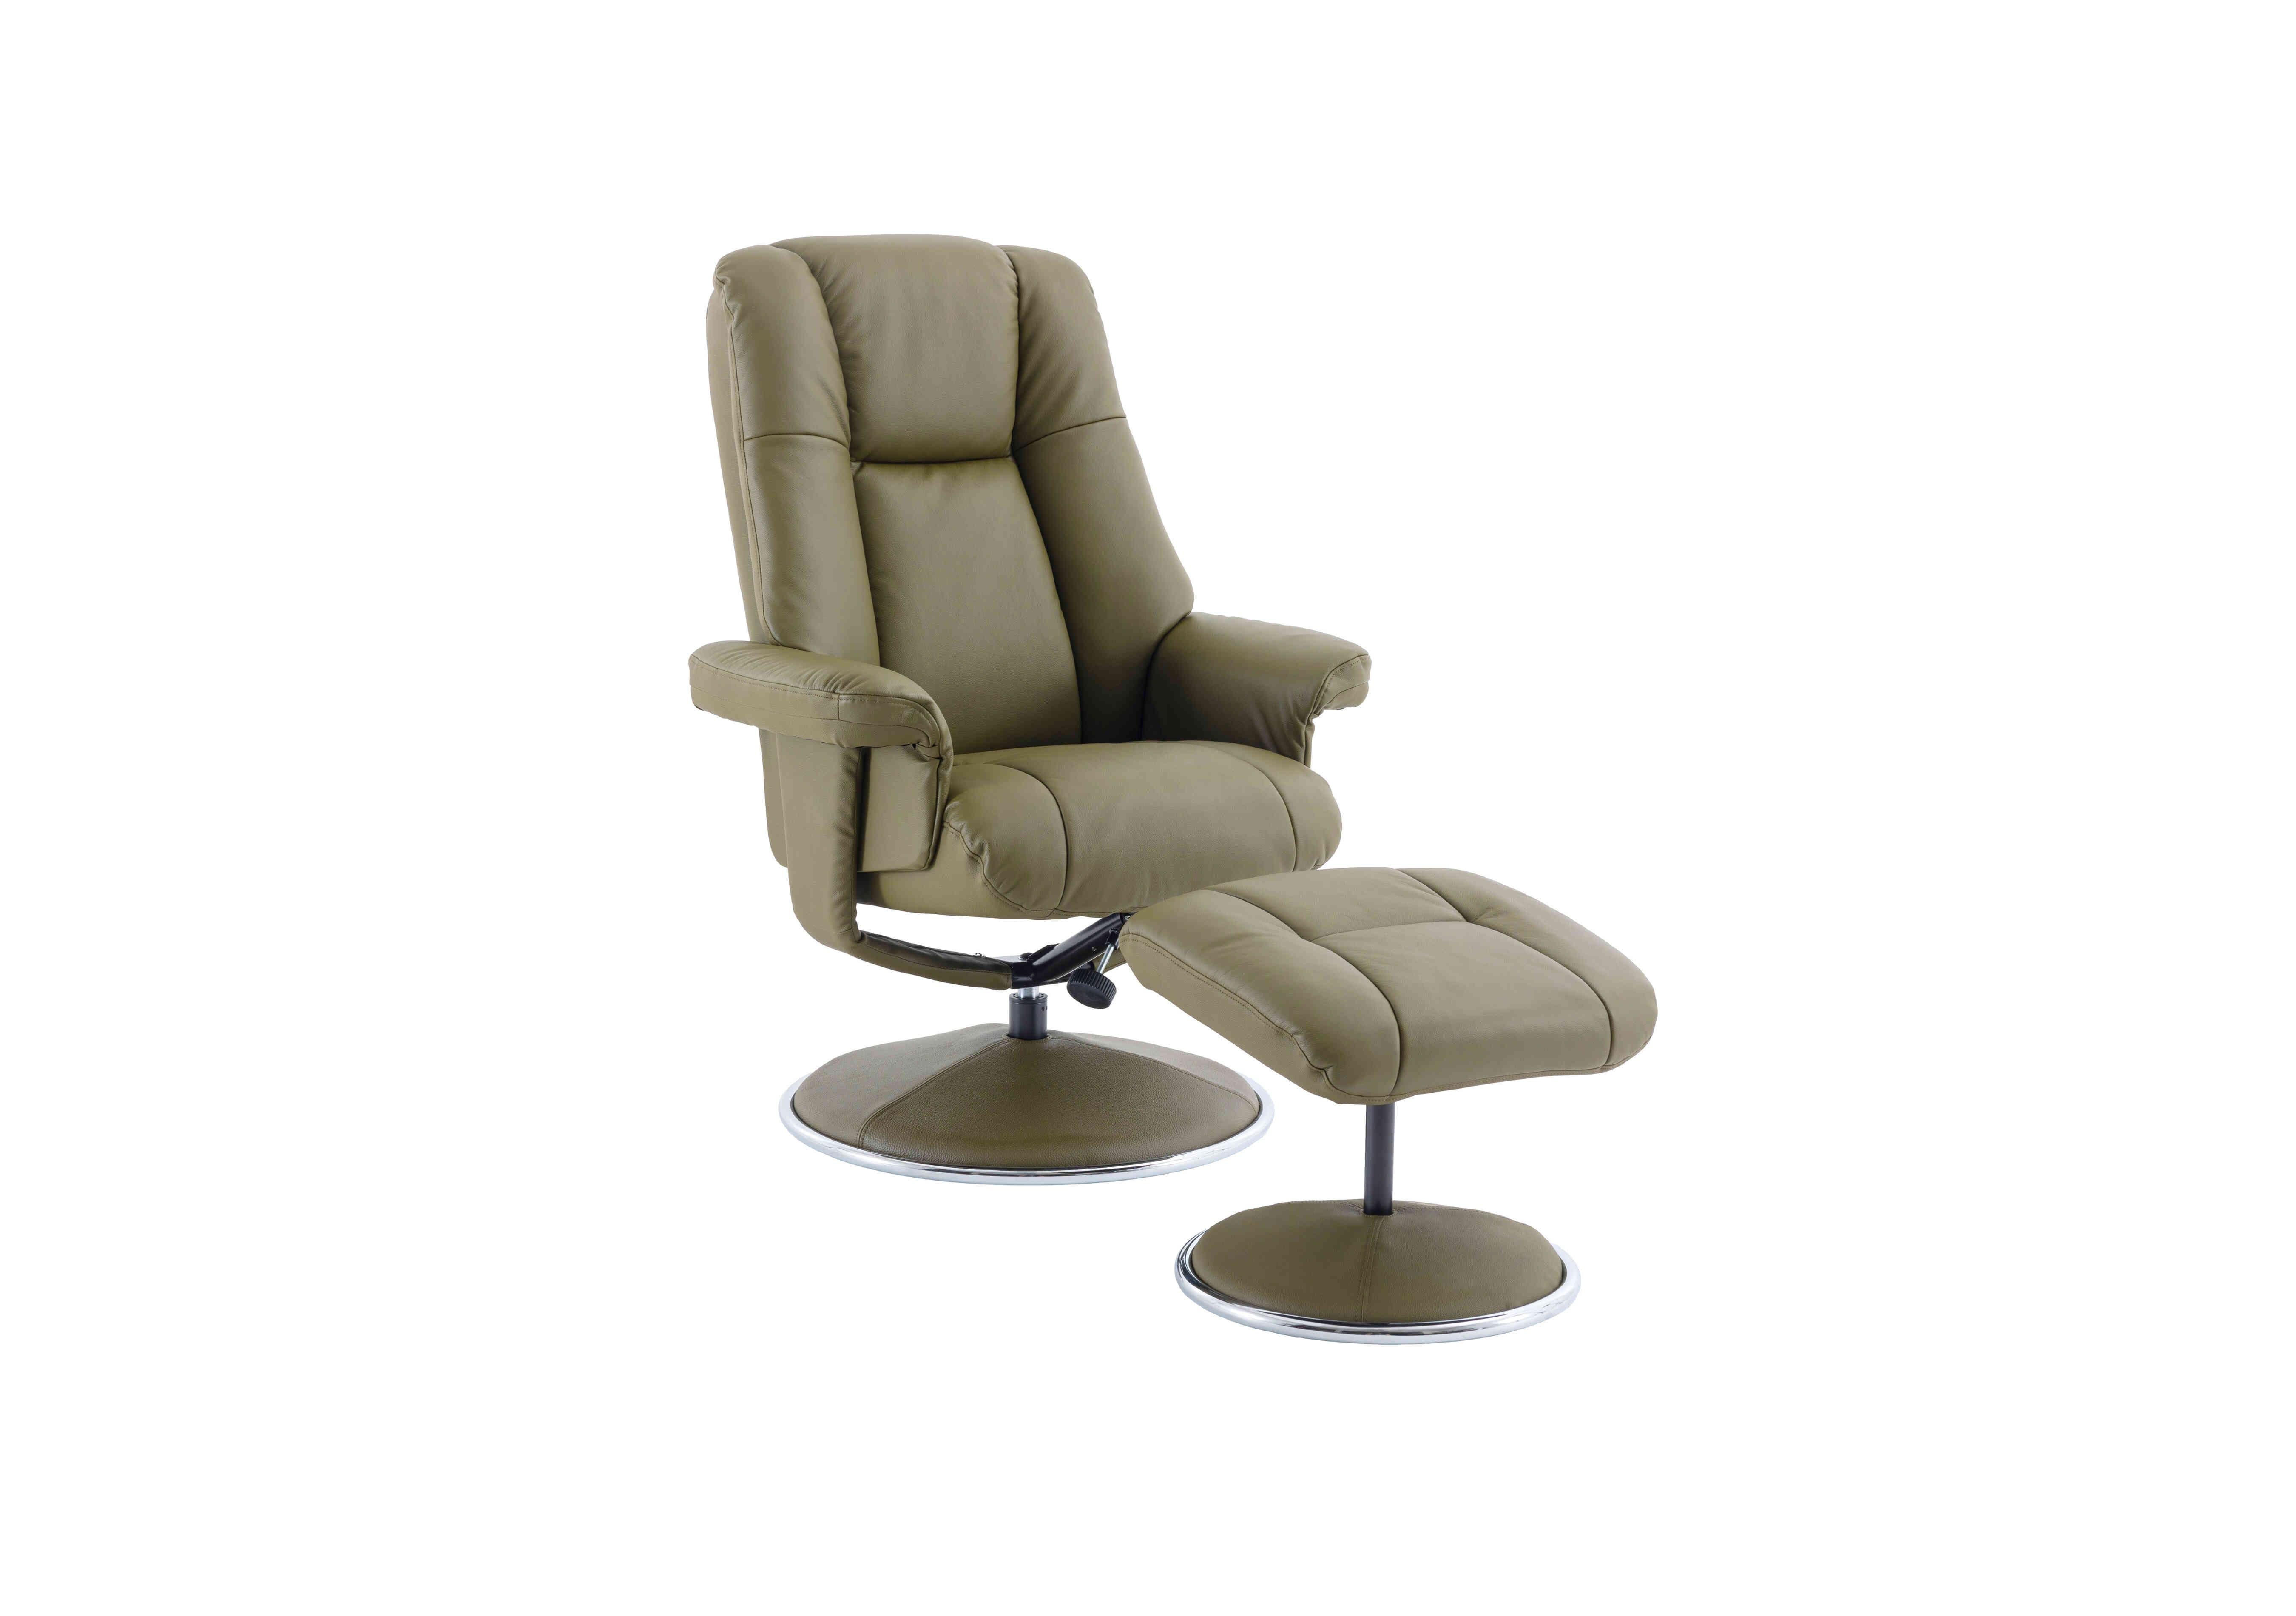 Troyes Leather Look High-Back 360 Swivel Chair and Footstool in Olive Green on Furniture Village